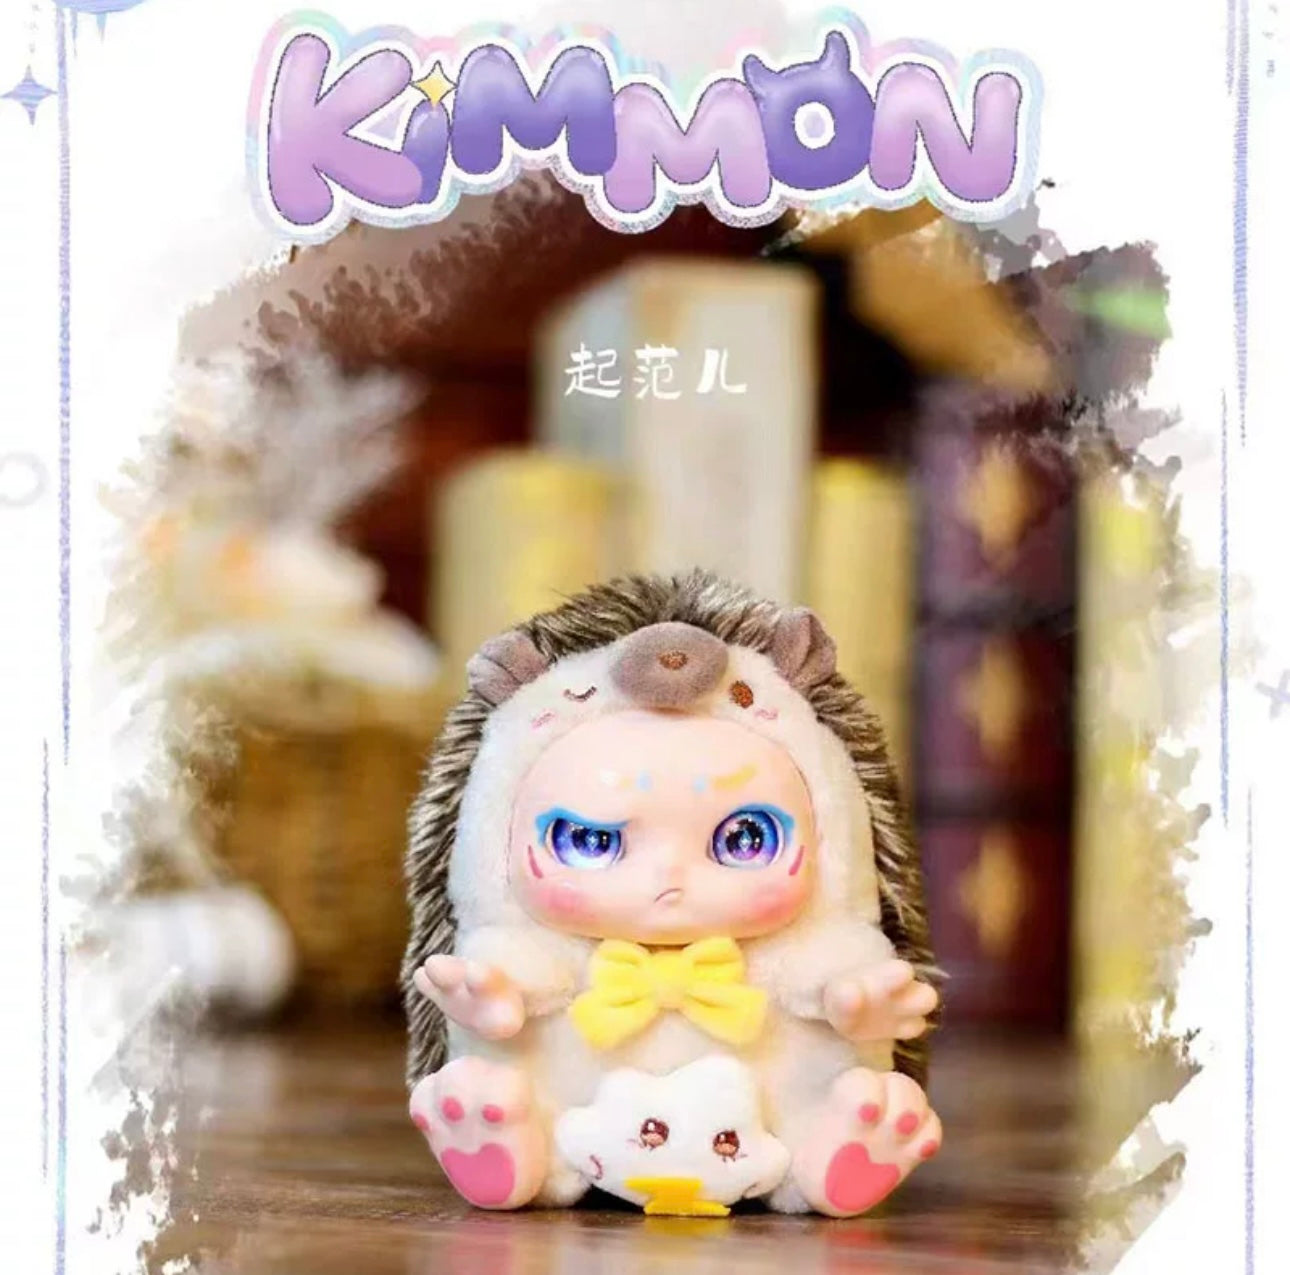 Fantasy Creatures NayaNaya KimMon Give You The Answer | Cat Dog Pig Hedgehog Bear Devil Angel - Collectable Toys Mystery Blind Box